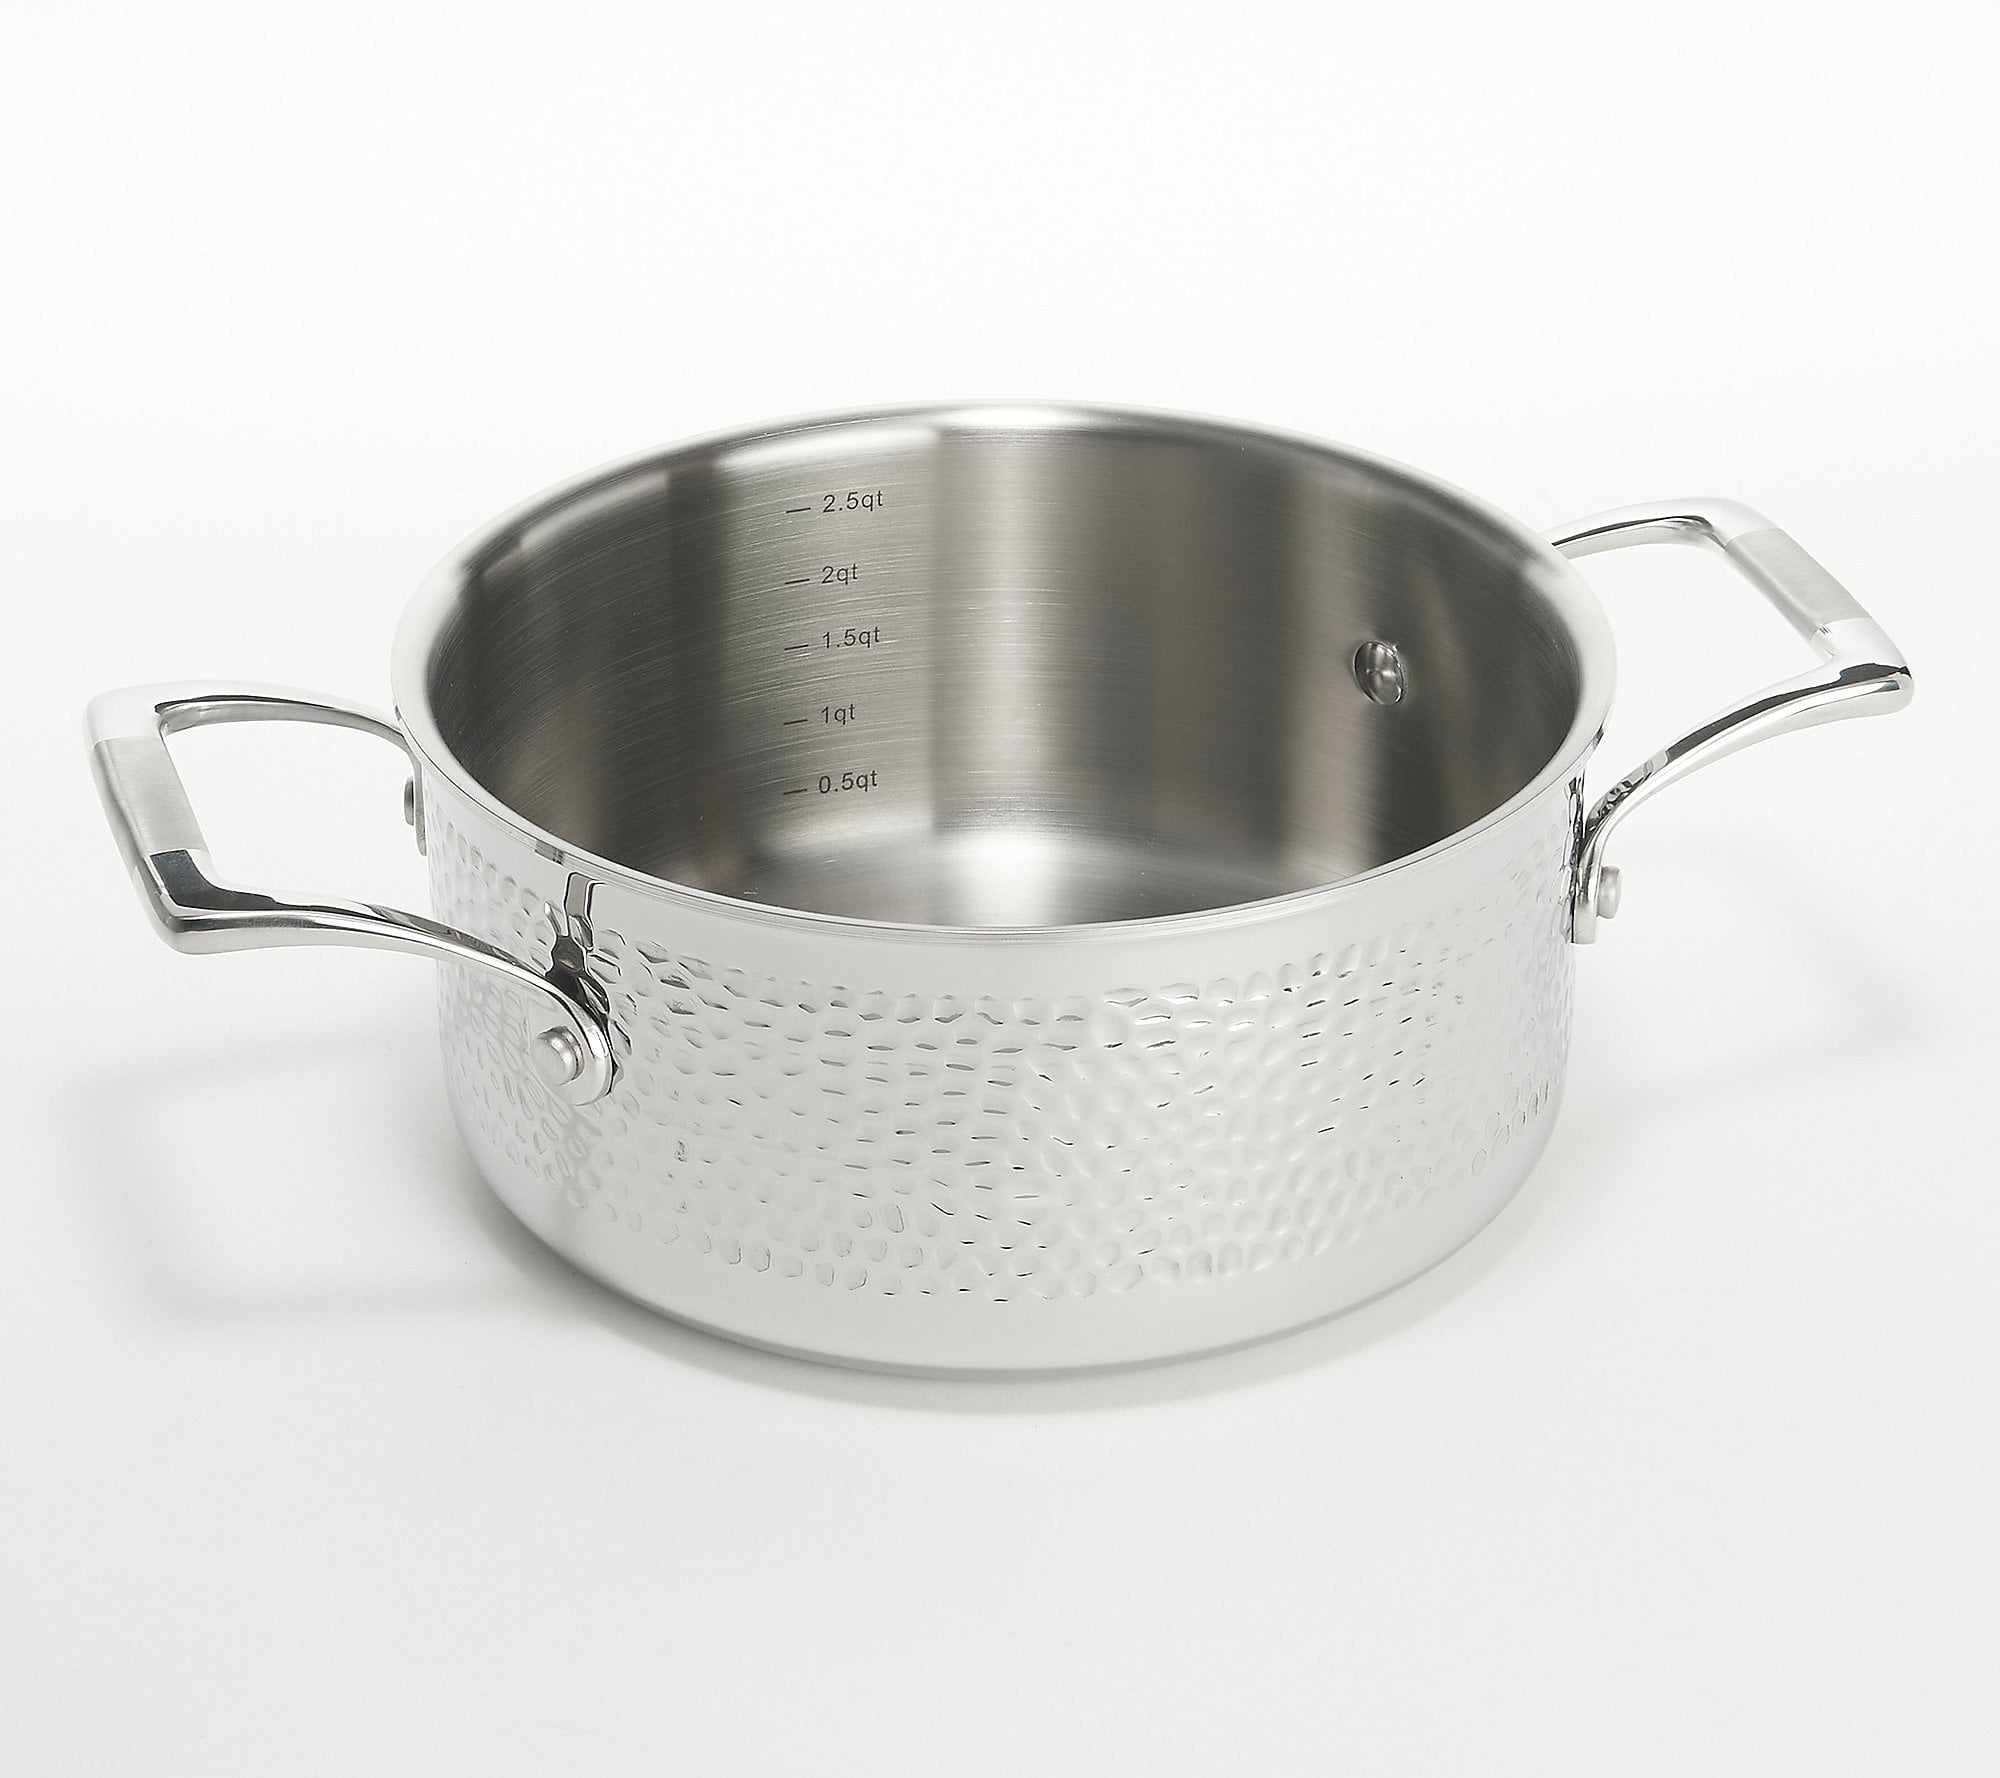 Blue Jean Chef 5-Quart Stainless Steel Pivoting Mixing Bowl (Renewed)